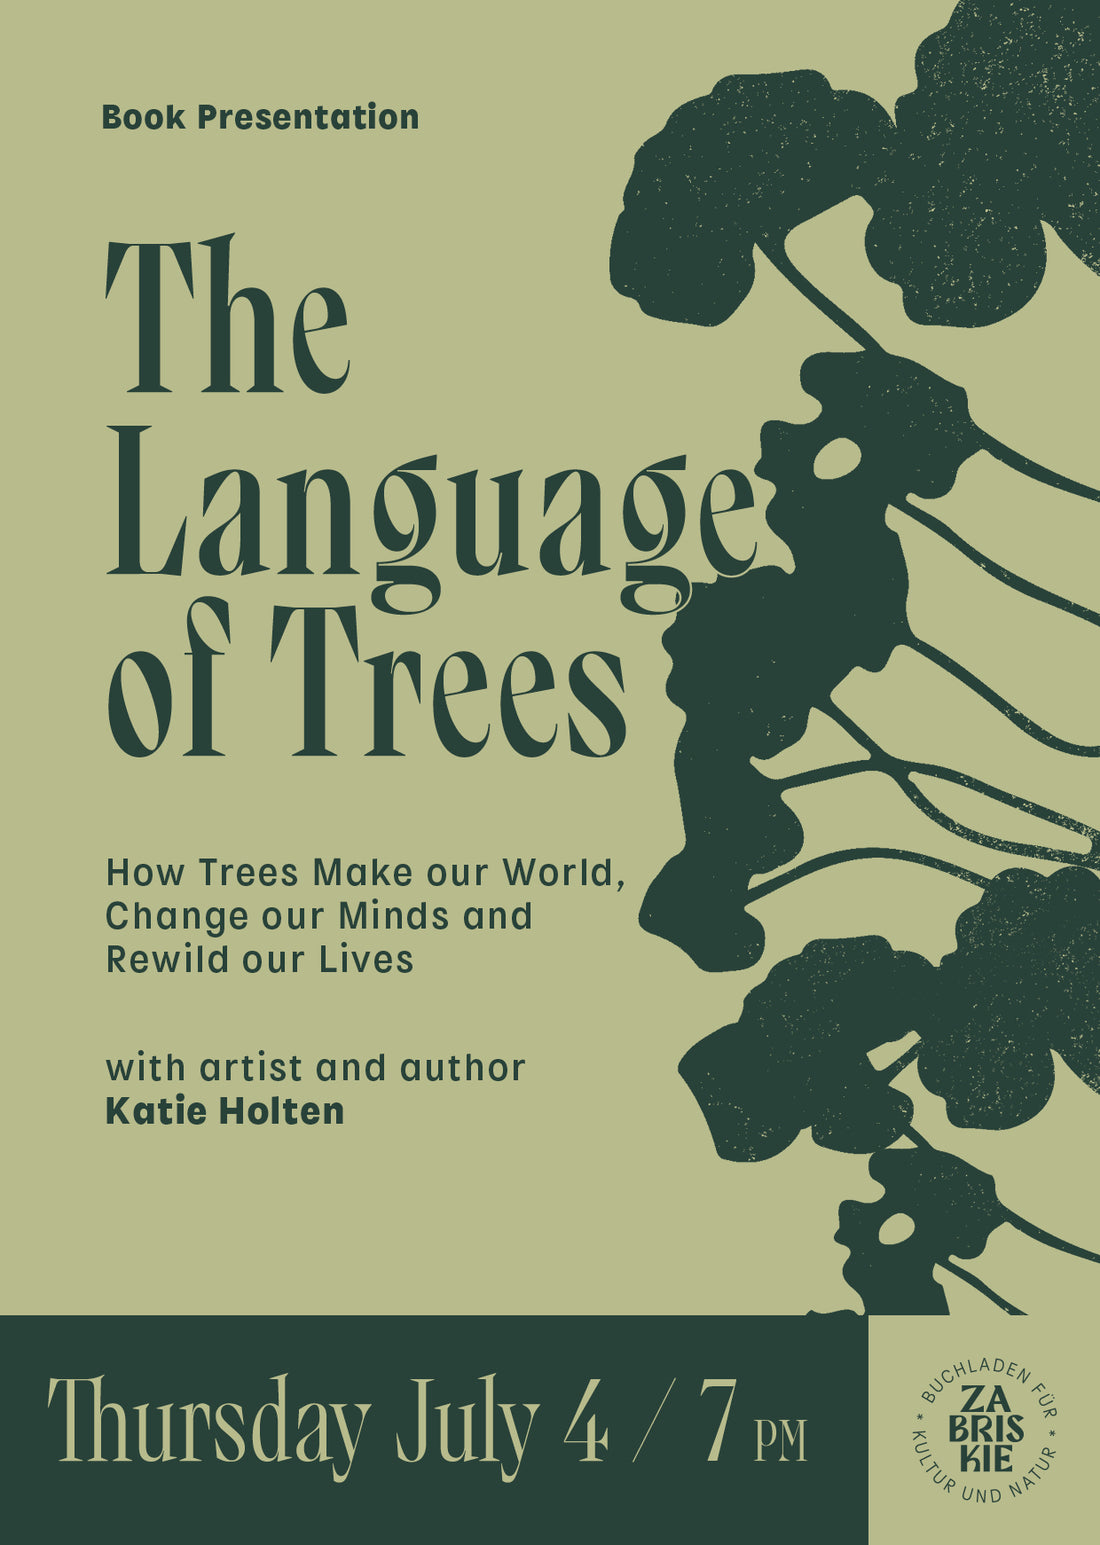 Book Presentation - The Language of Trees with Katie Holten